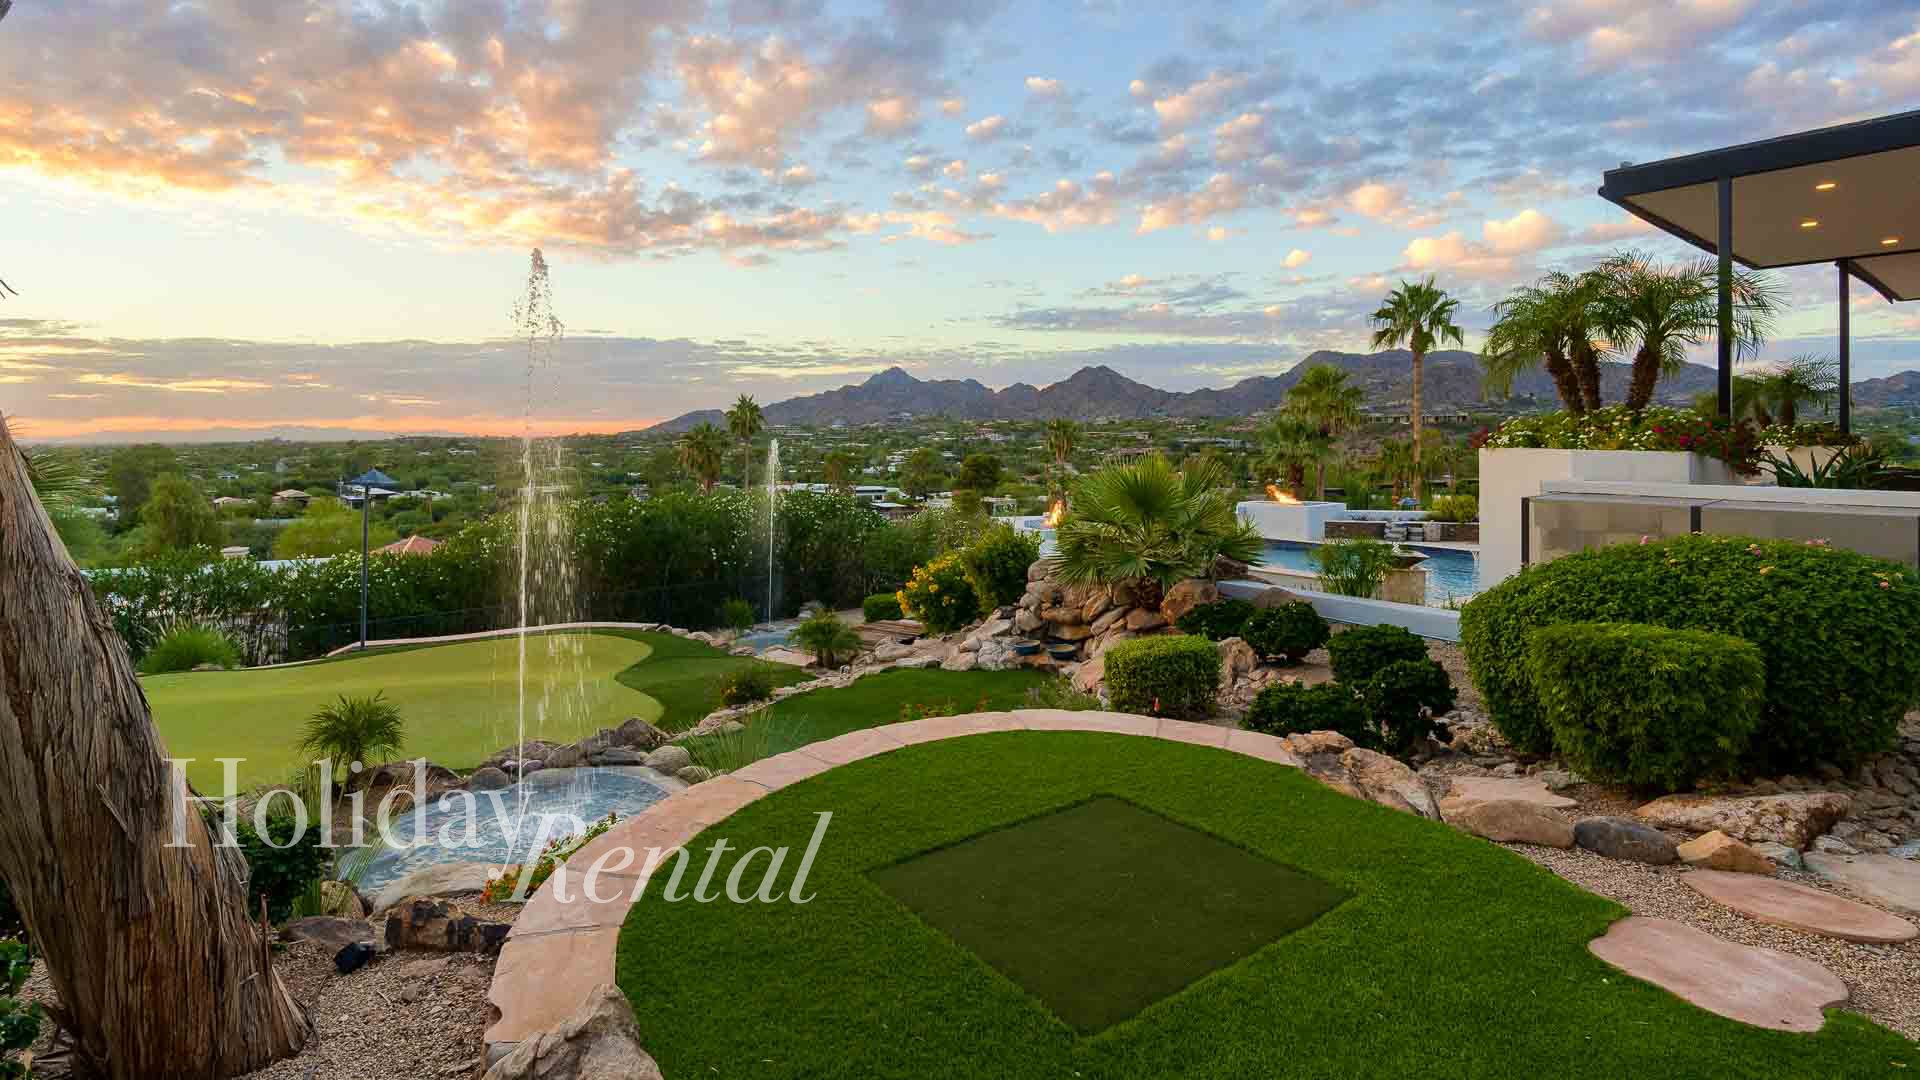 This resort-style property features multiple putting greens and water features